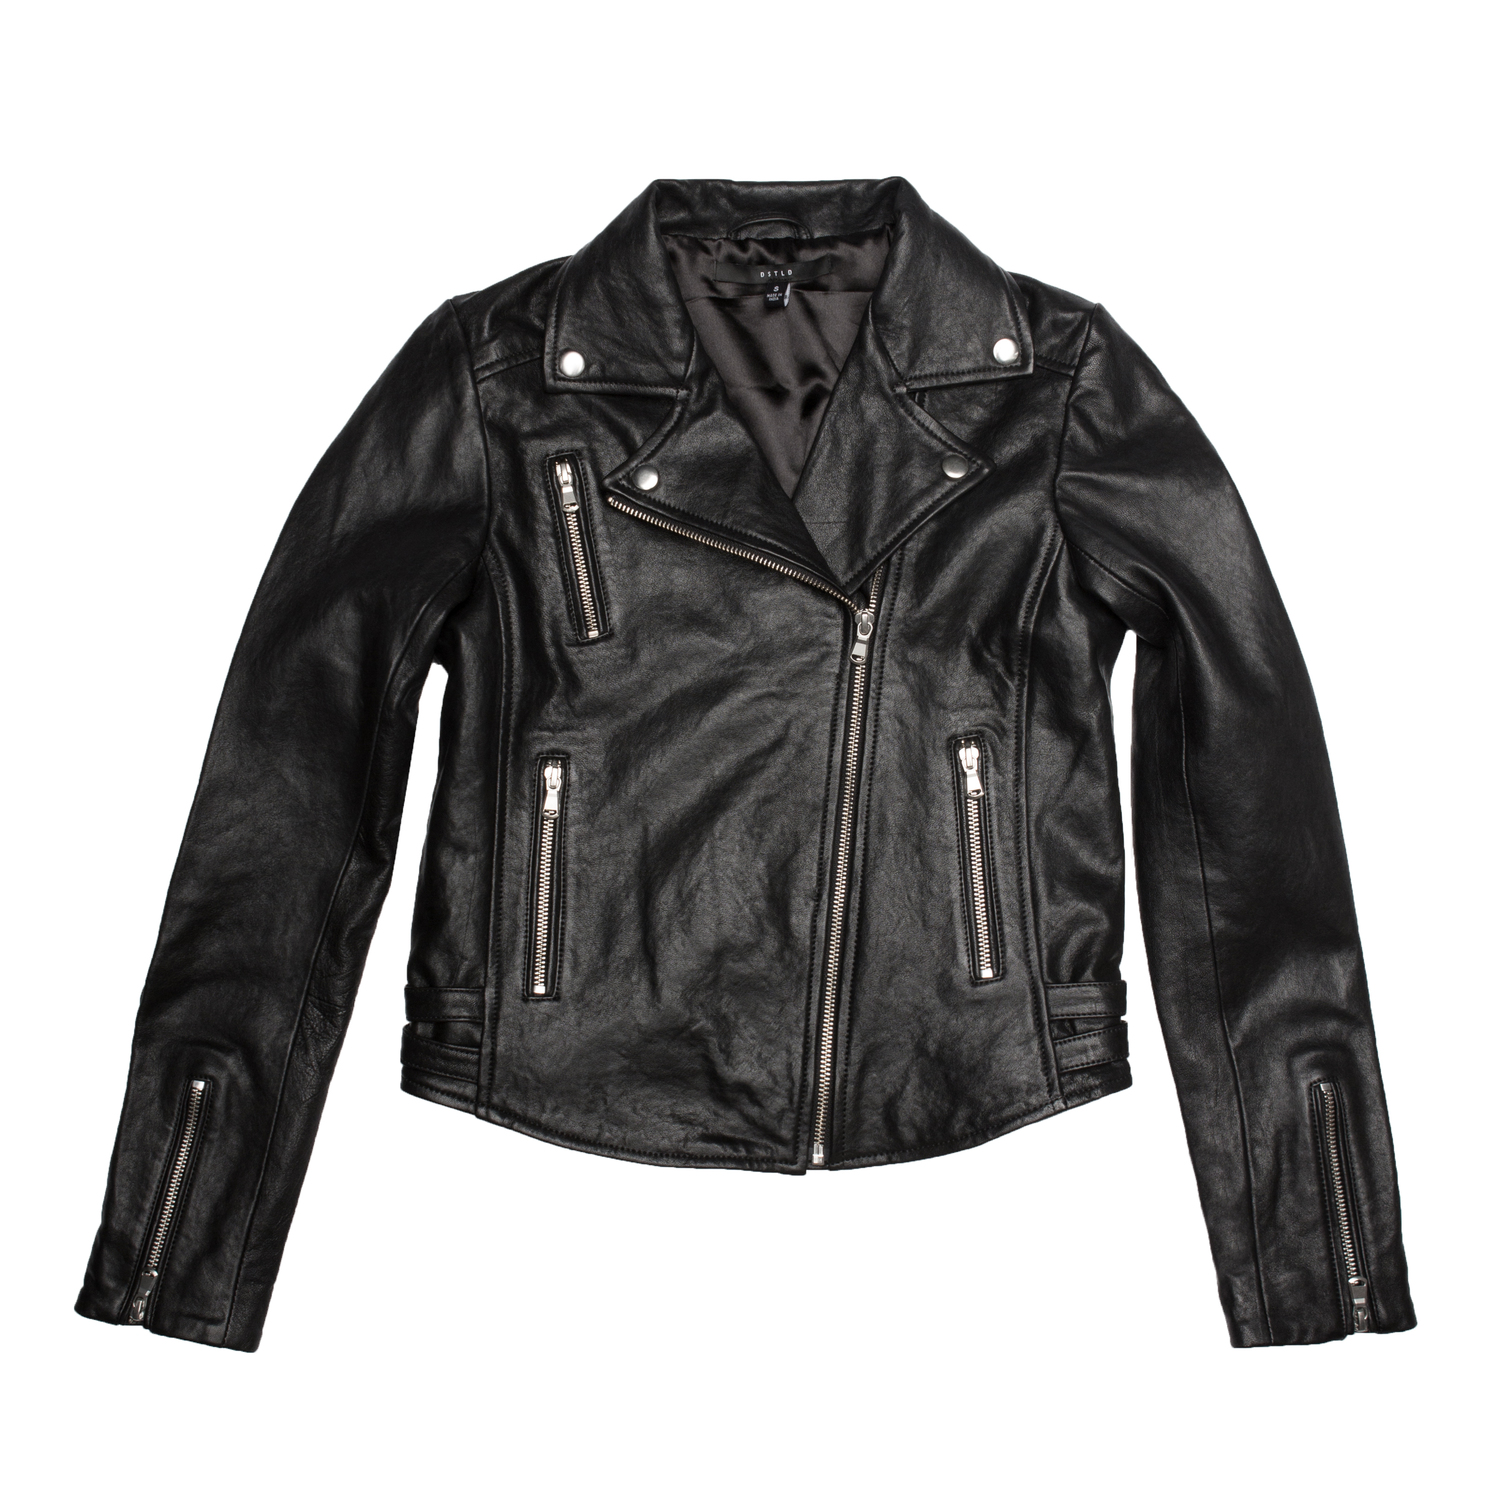 Womens Leather Moto Jacket With Silver Hardware $350 | DSTLD